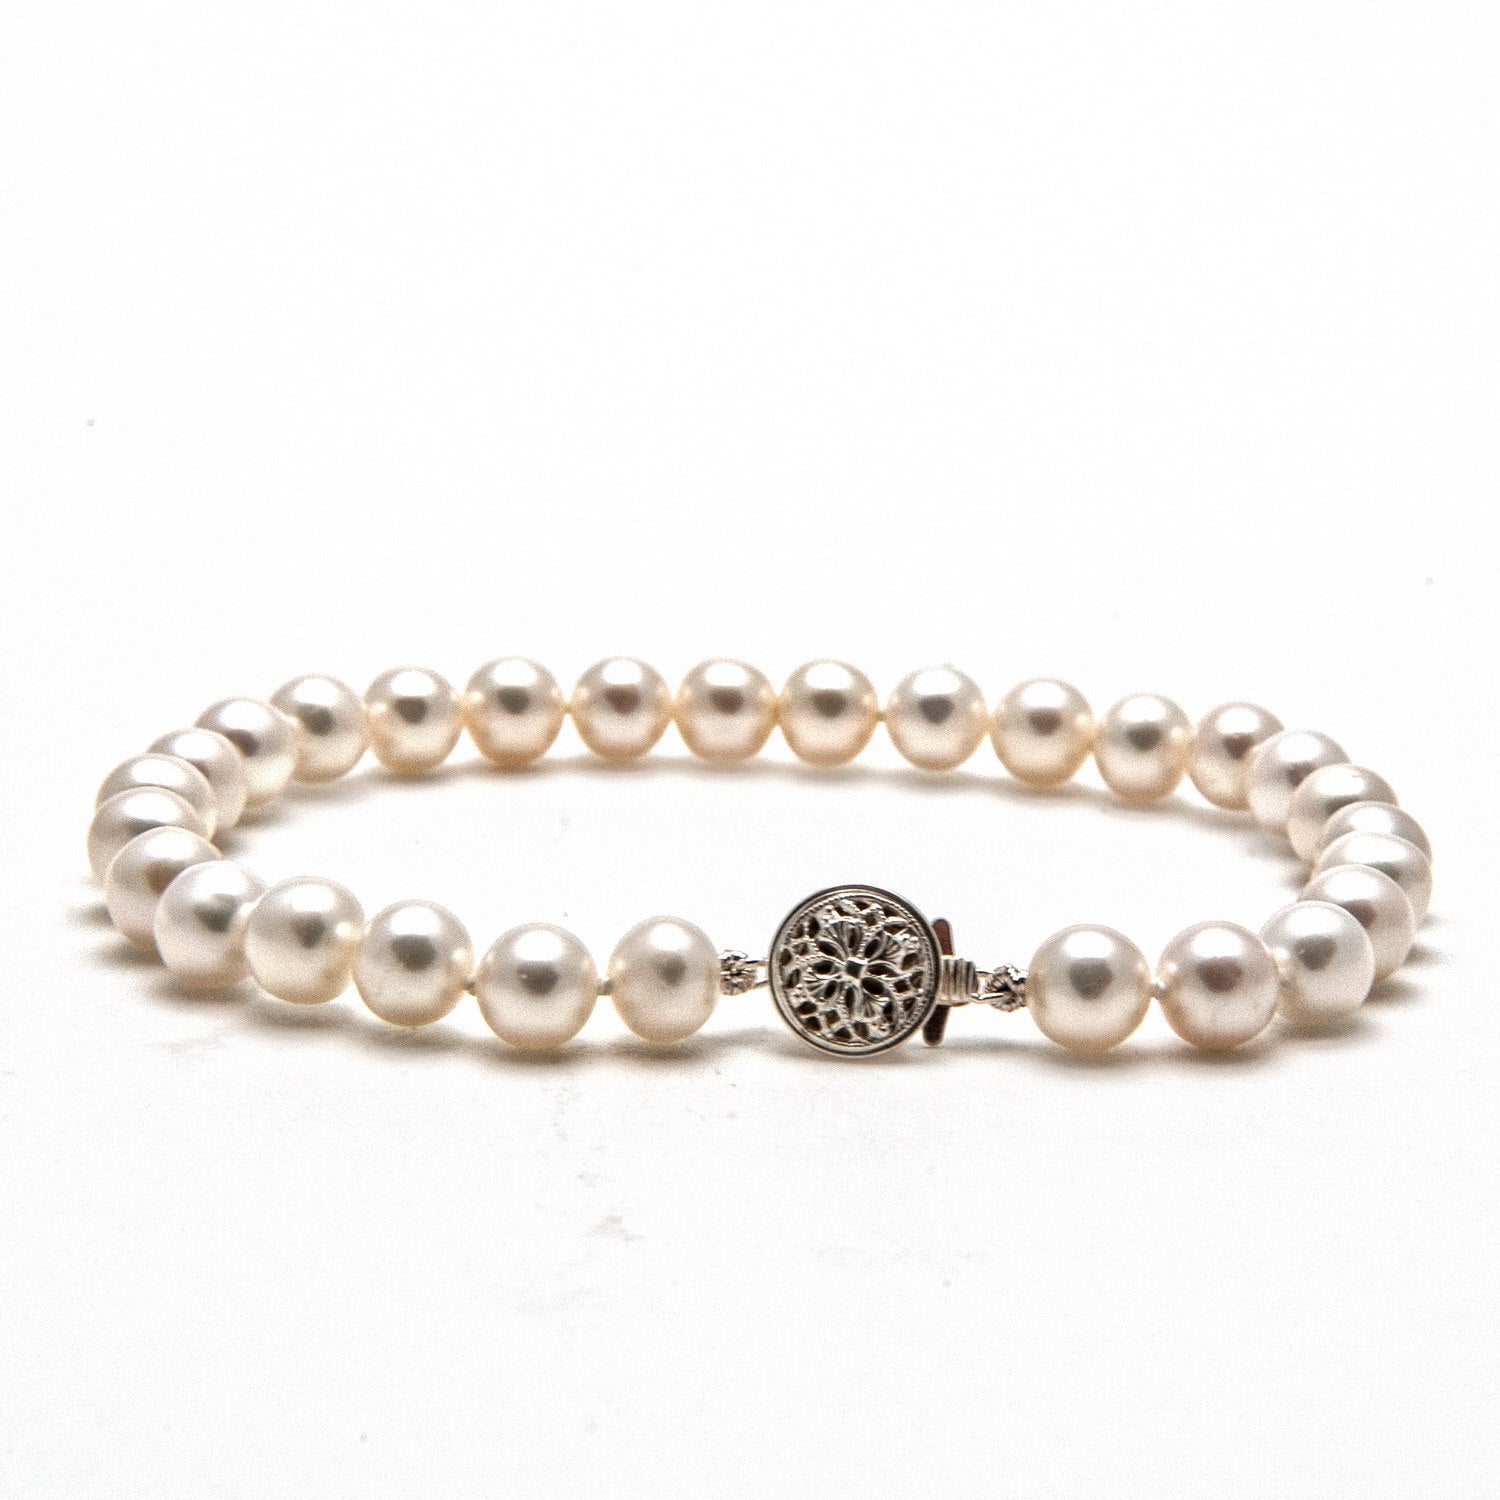 can pearl bracelets be resized?